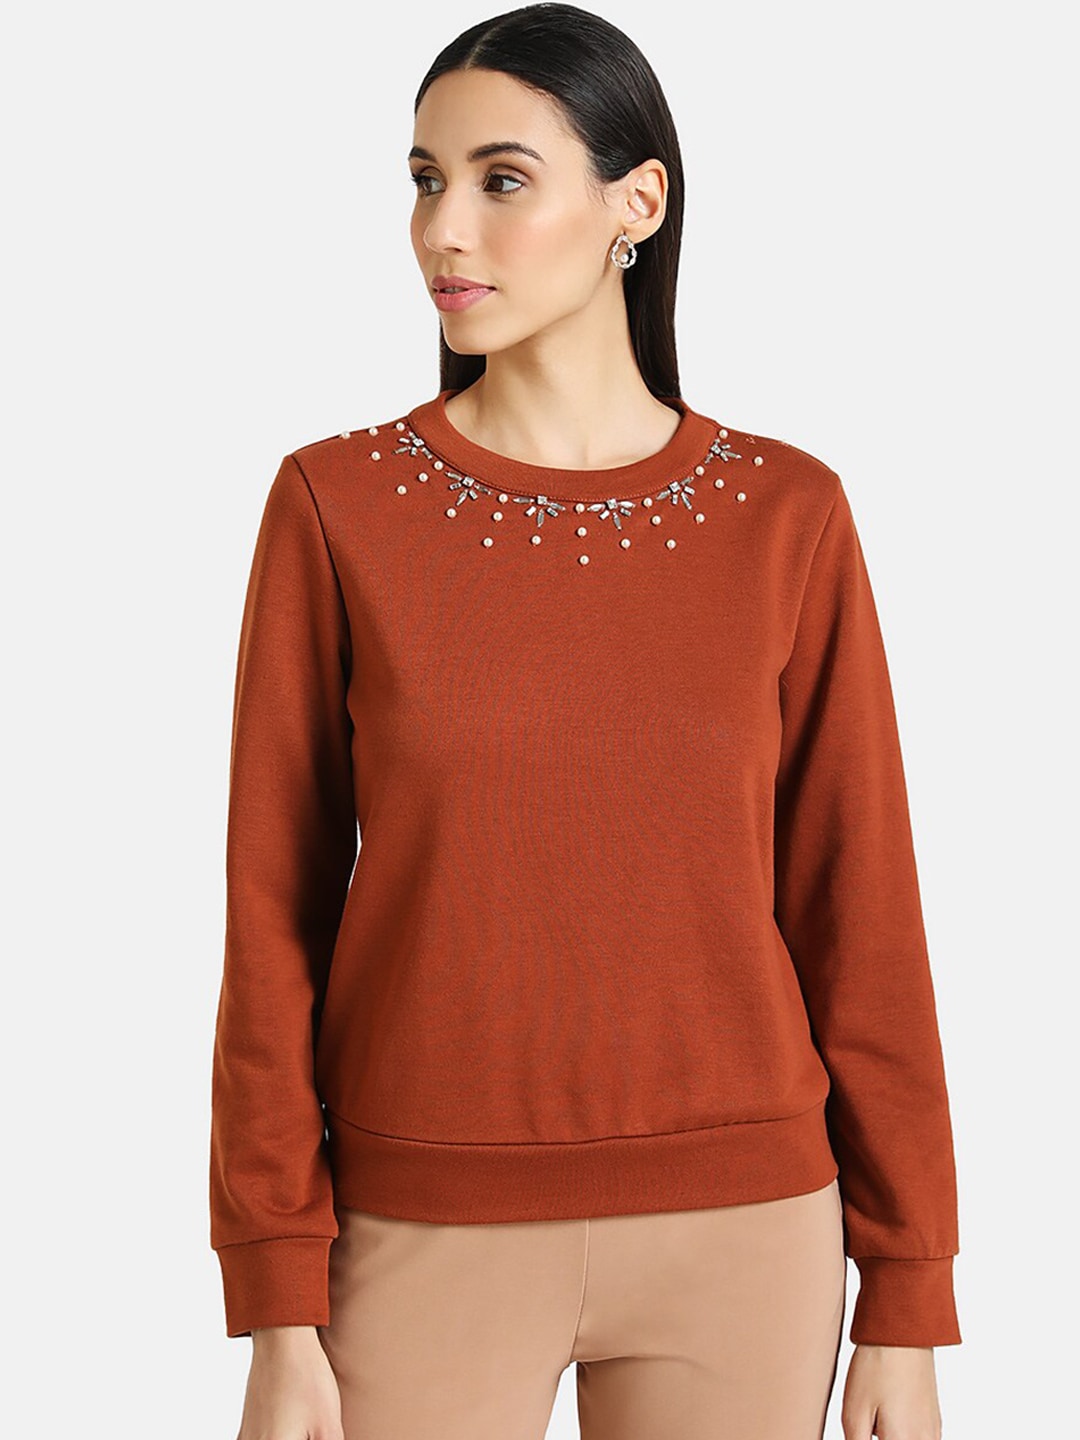 Kazo Women Rust Brown Embellished Pullover Sweater Price in India